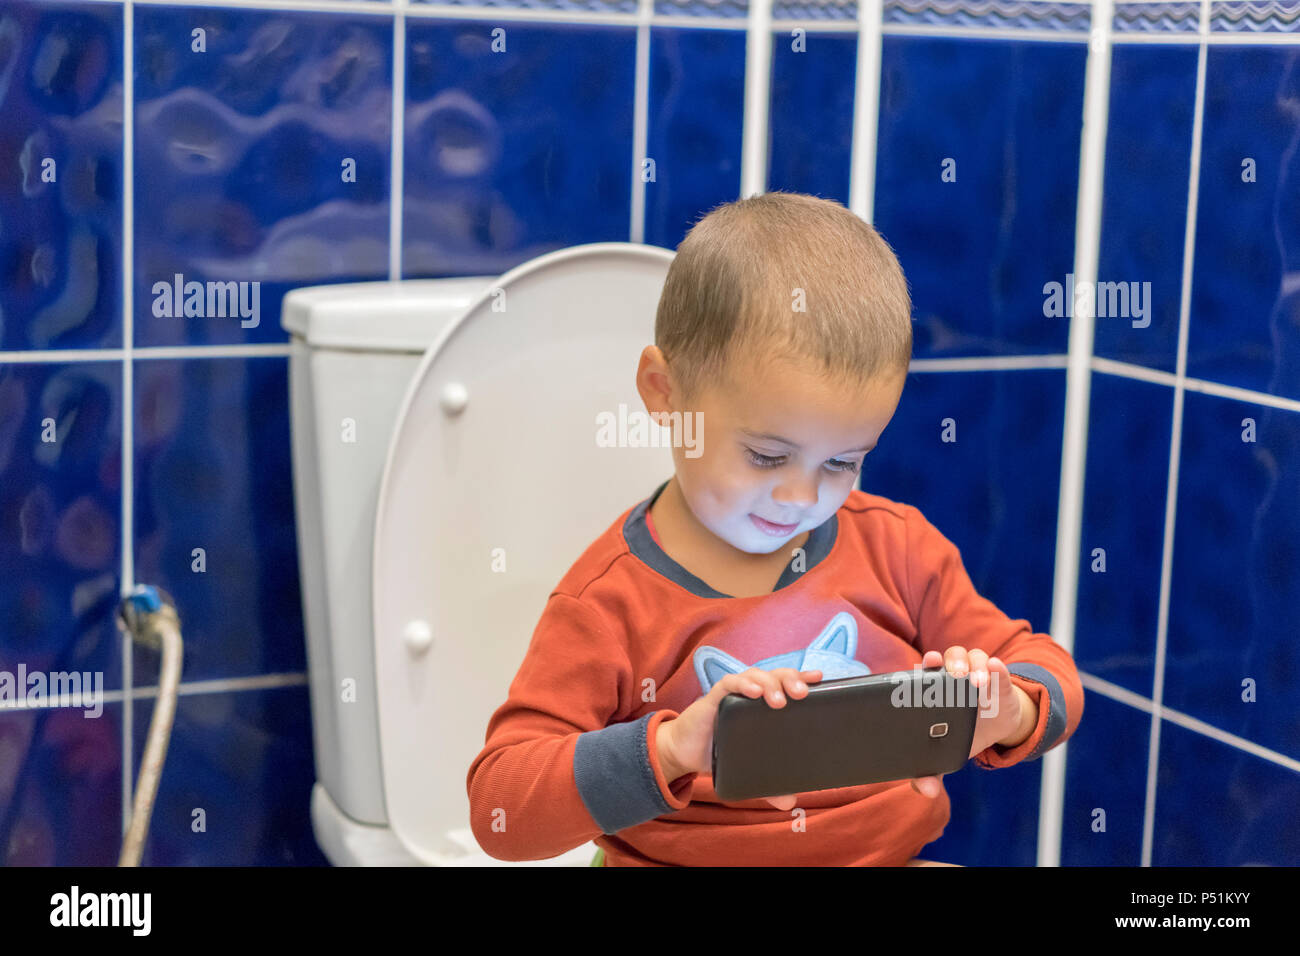 Little boy sitting on the toilet in the bathroom at home with using a smartphone. Toddler boy sitting on toilet with smartphone. Stock Photo